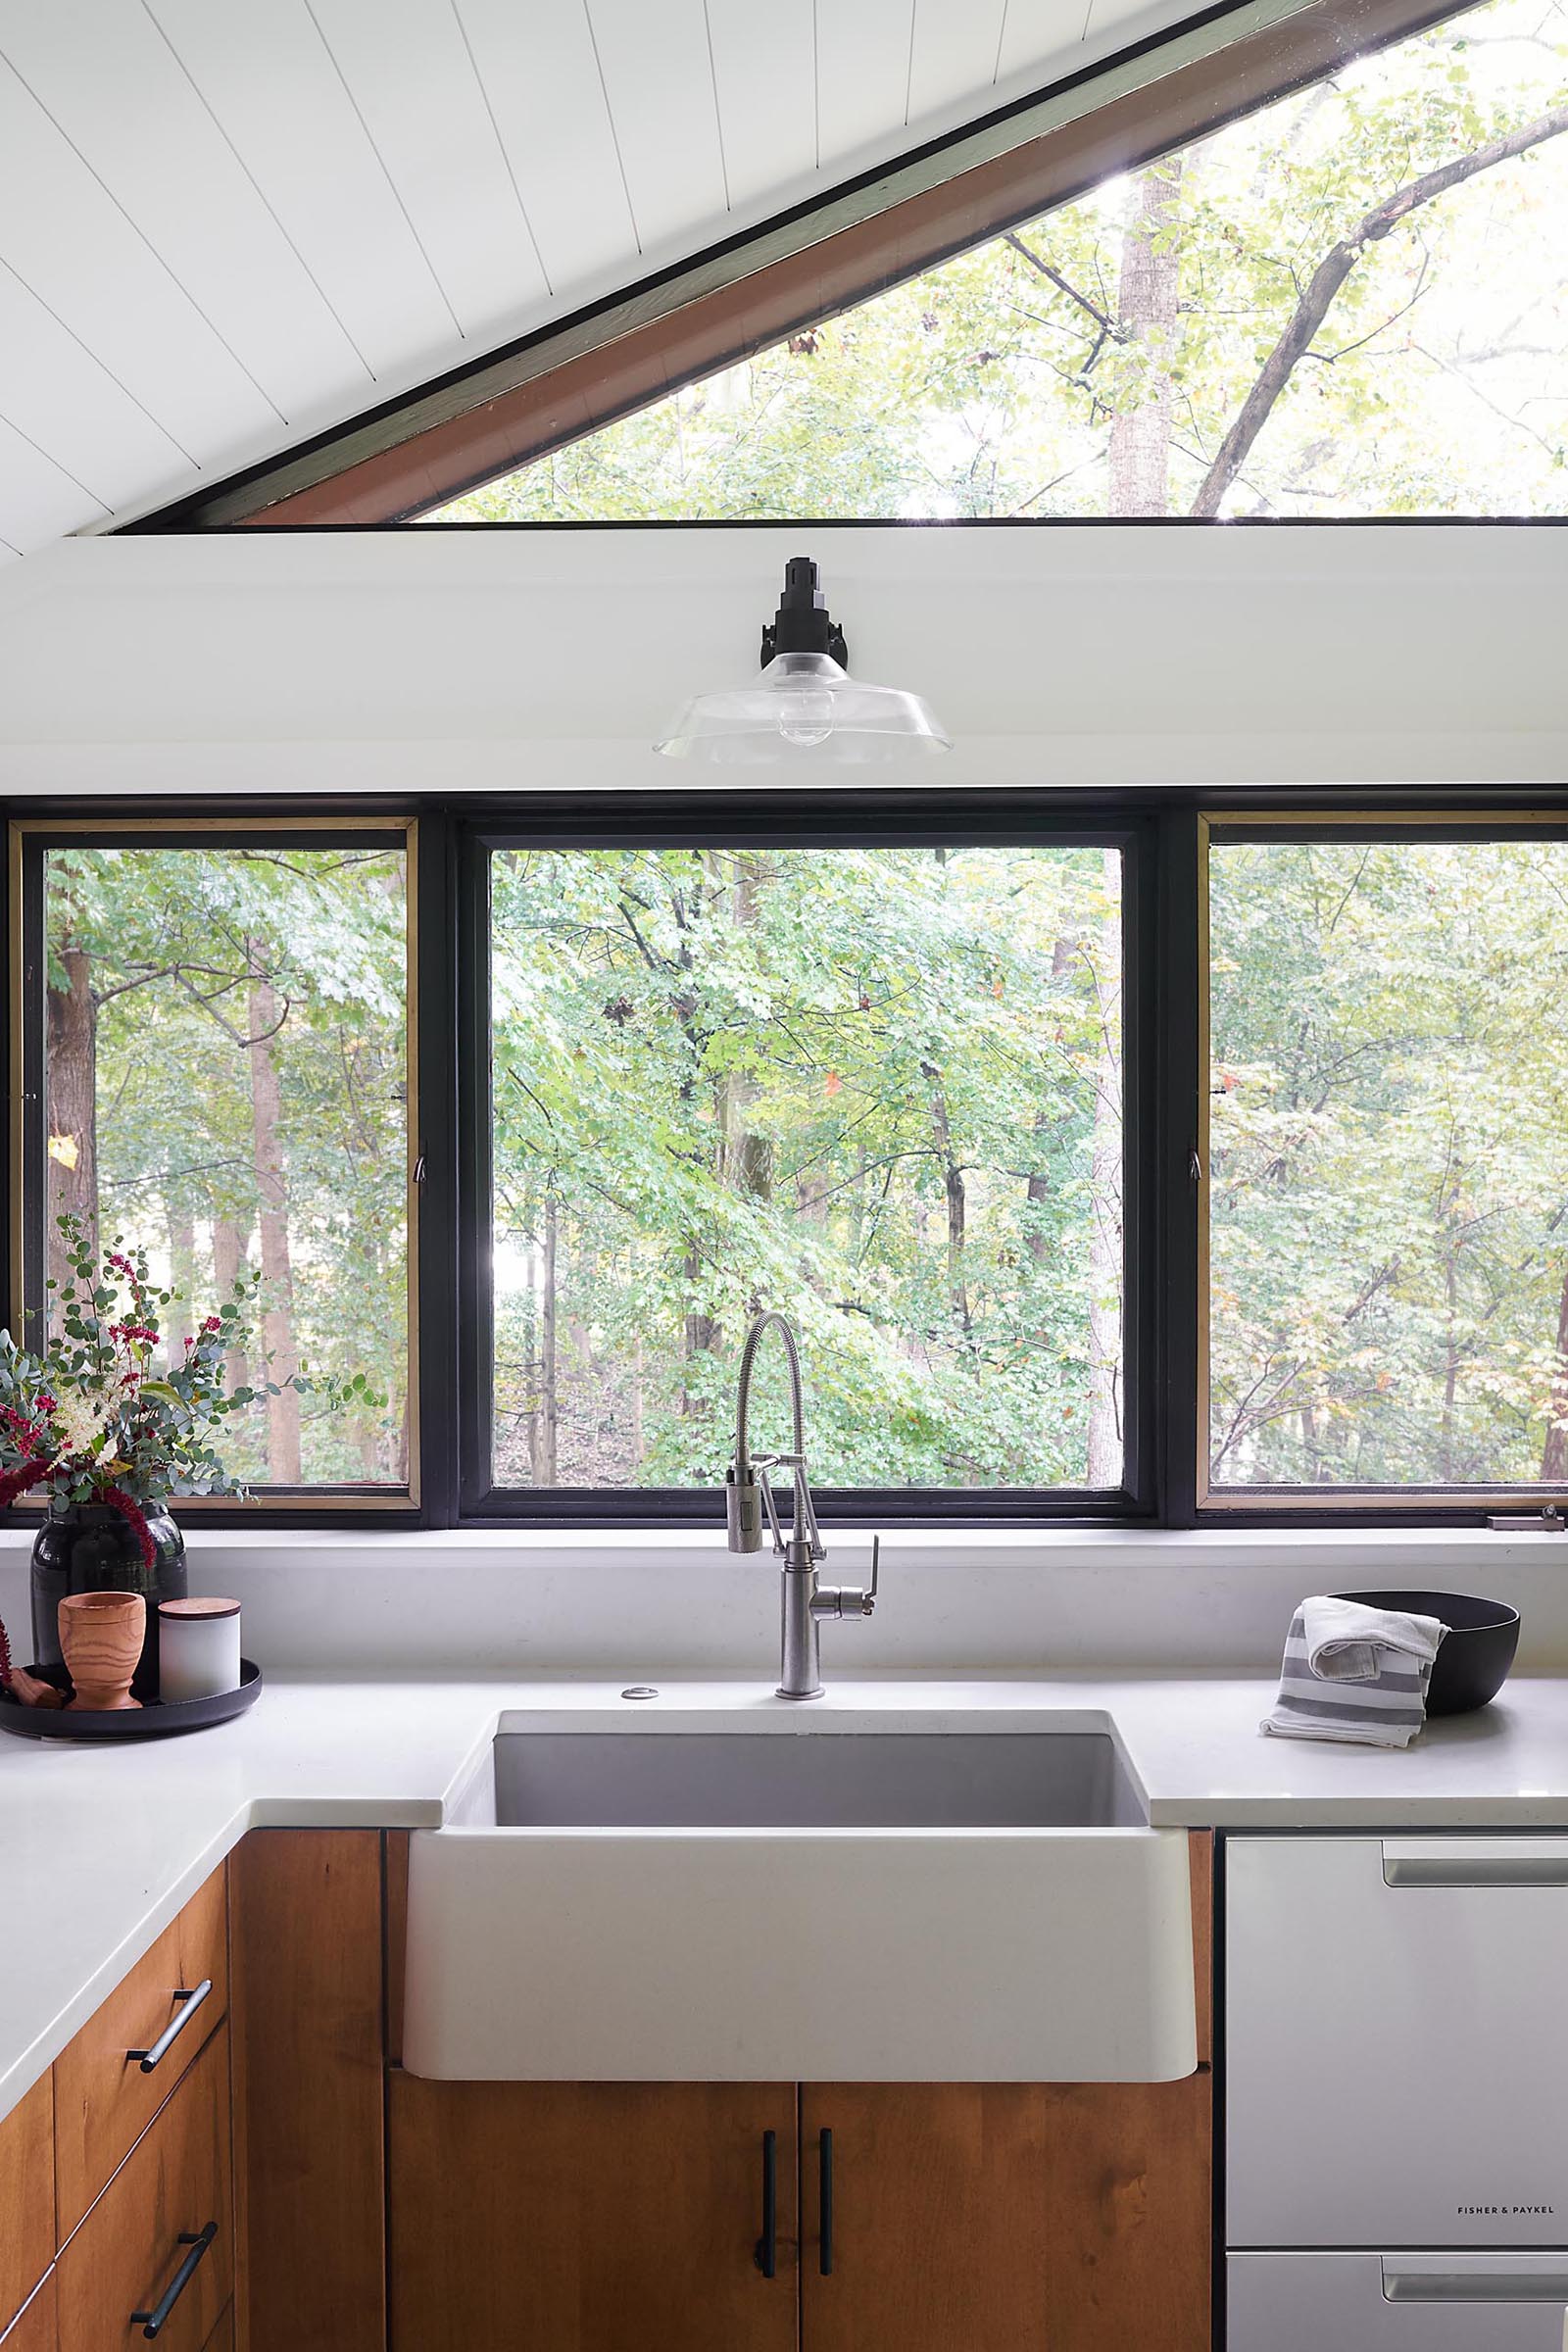 A modern kitchen with white countertops, wood cabinets, and an apron sink.